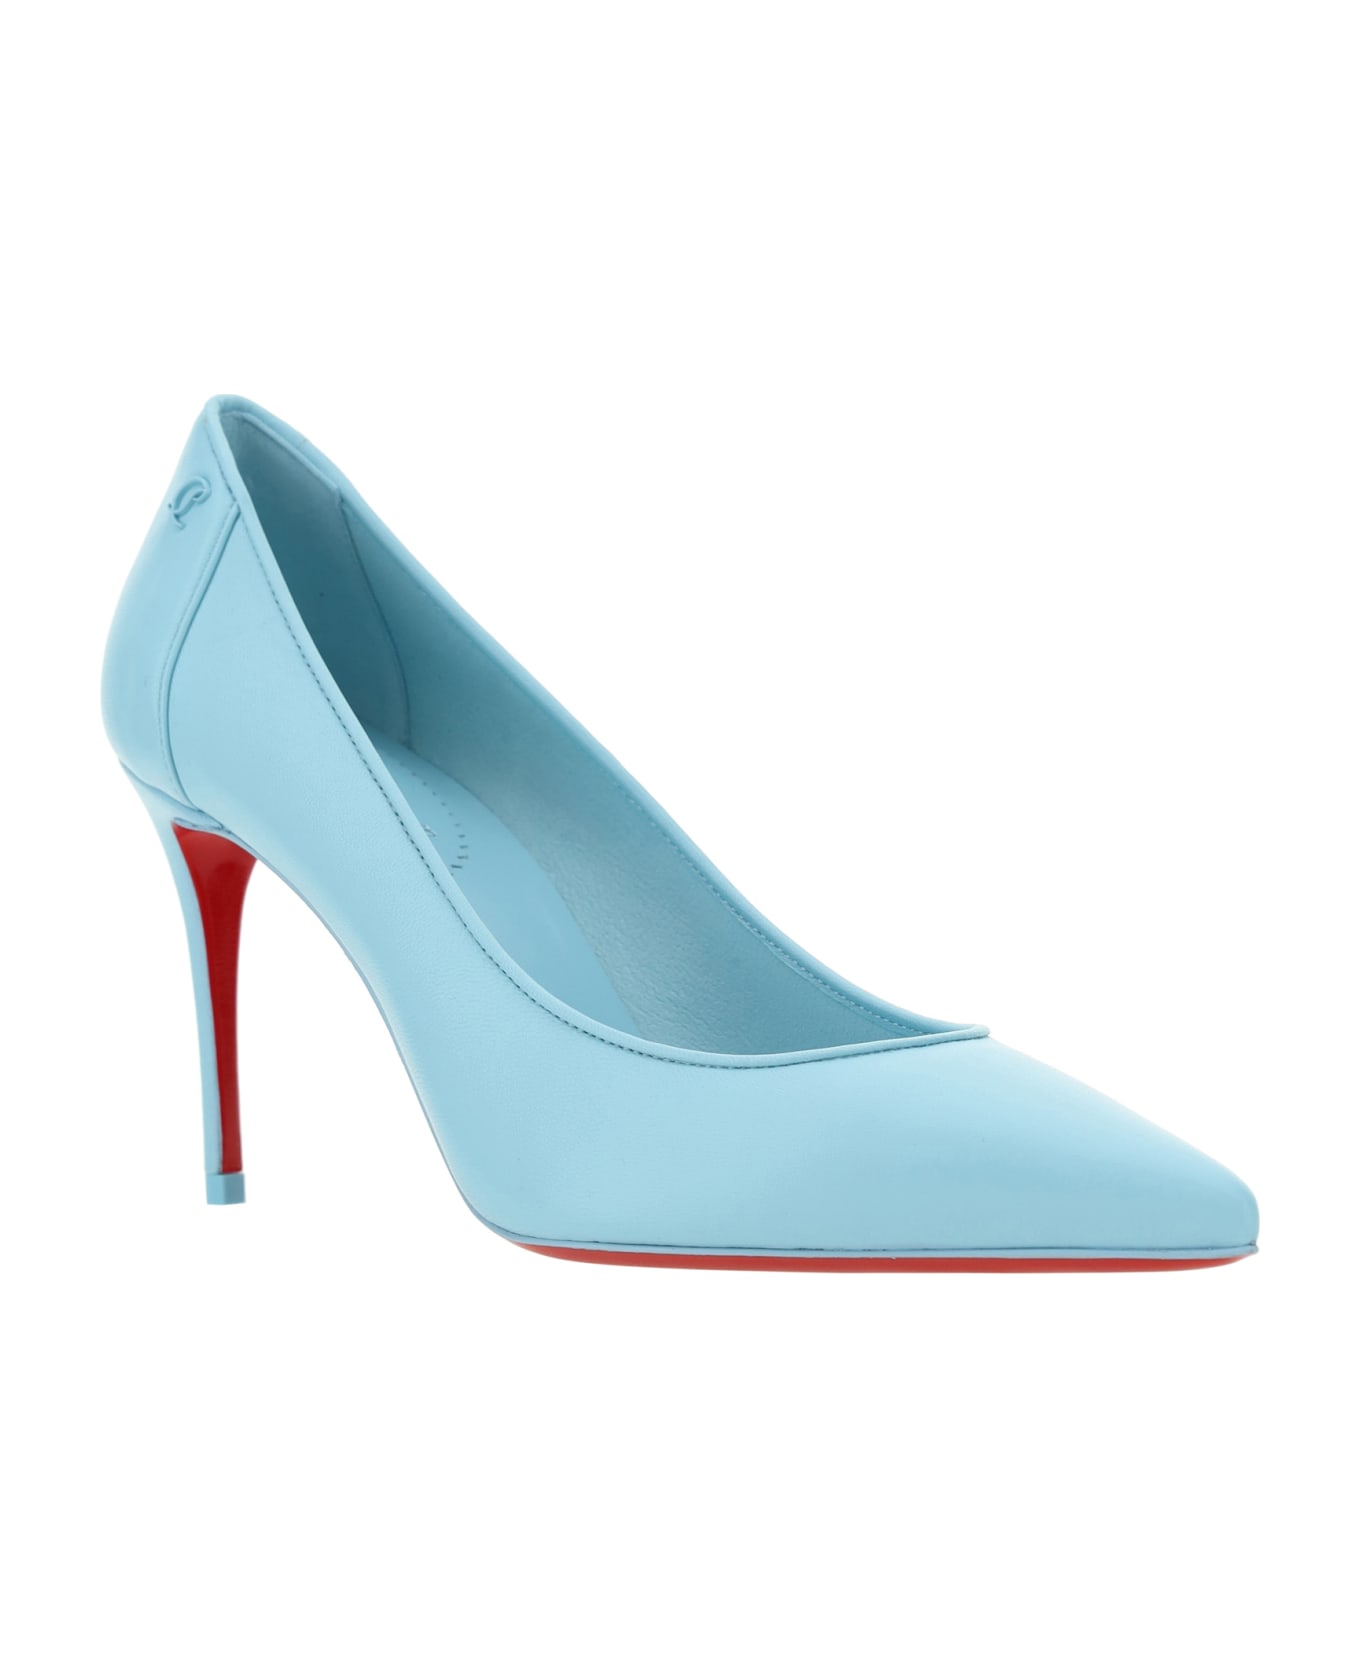 Christian Louboutin Sporty Kate Pumps - MINERAL/LIN MINERAL